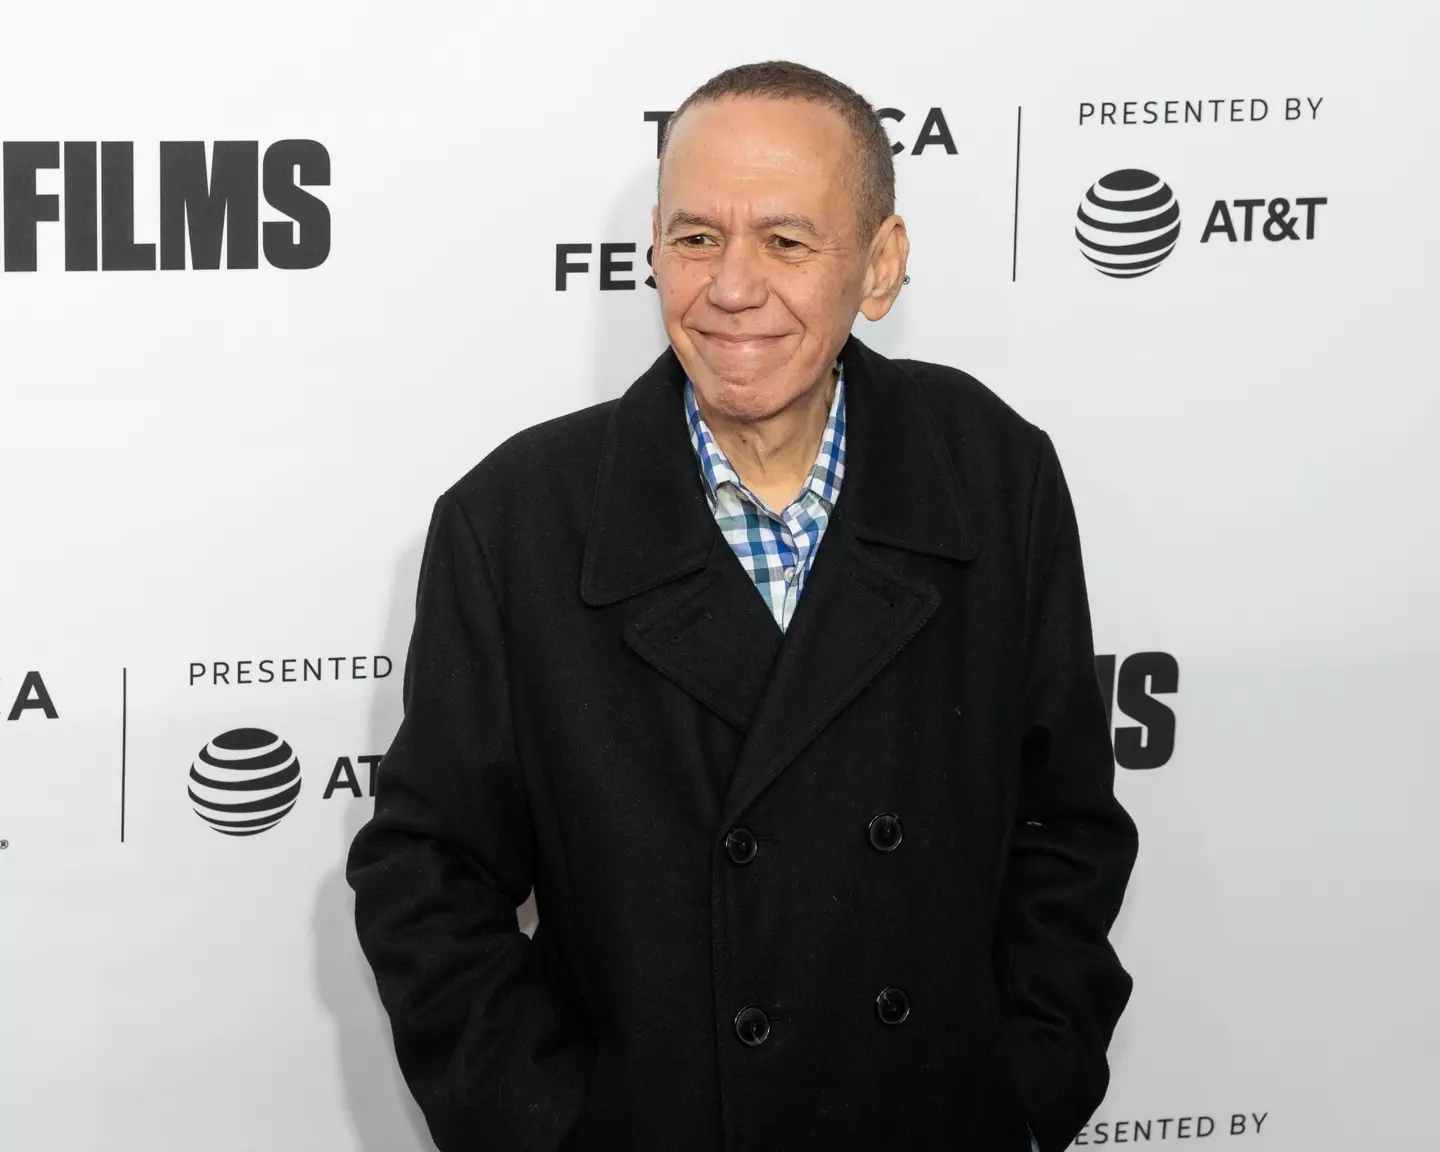 Gilbert Gottfried sadly passed away at the age of 67 earlier this year.